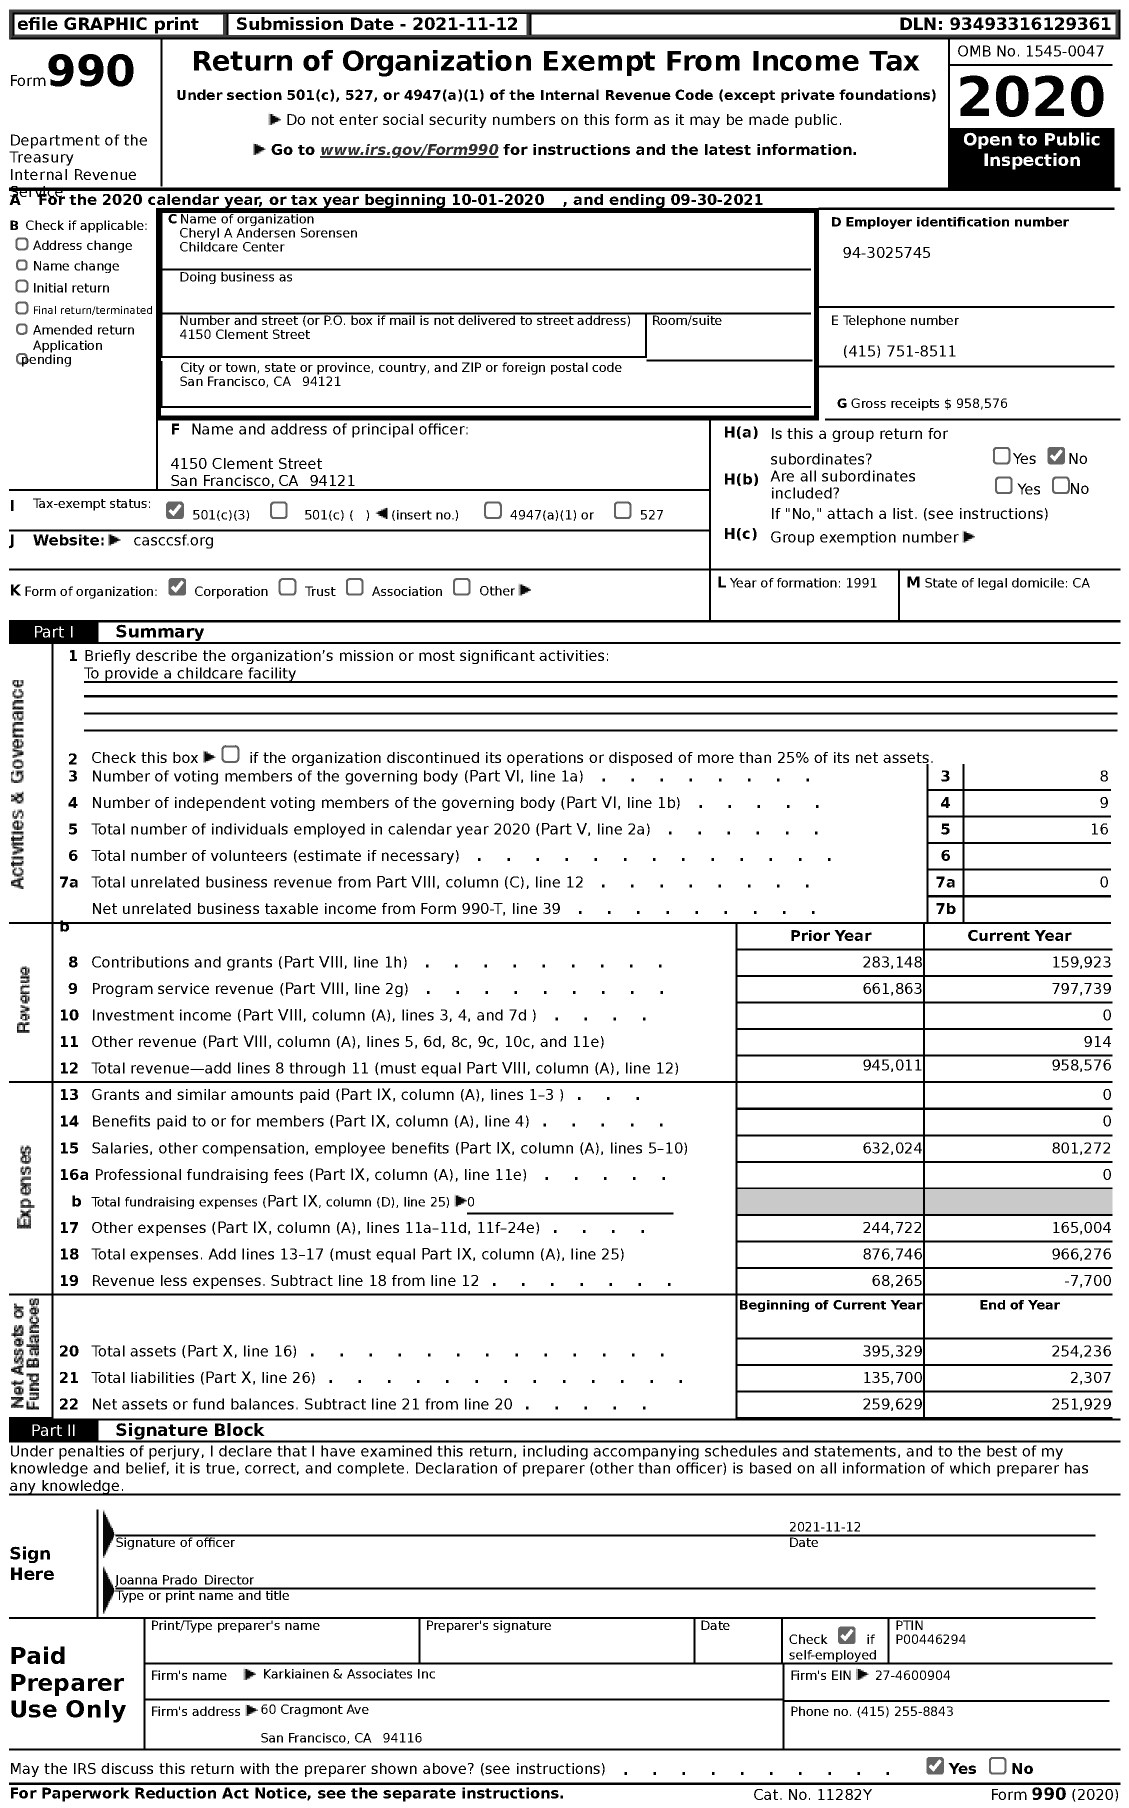 Image of first page of 2020 Form 990 for Cheryl A Andersen Sorensen Childcare Center